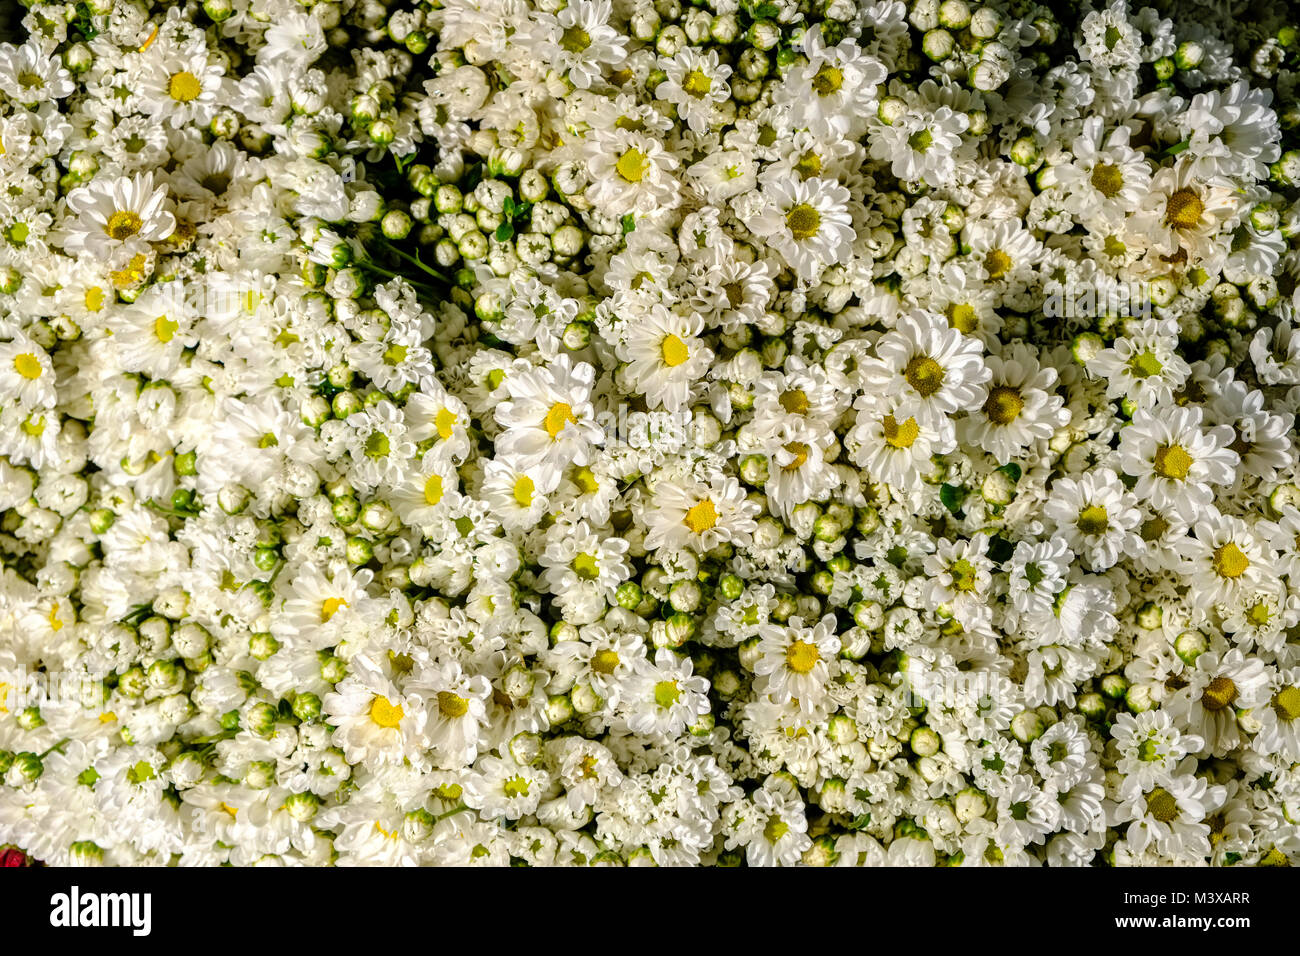 White asters (Aster oblongifolius) are for sale at the flower market in the streets of town Stock Photo